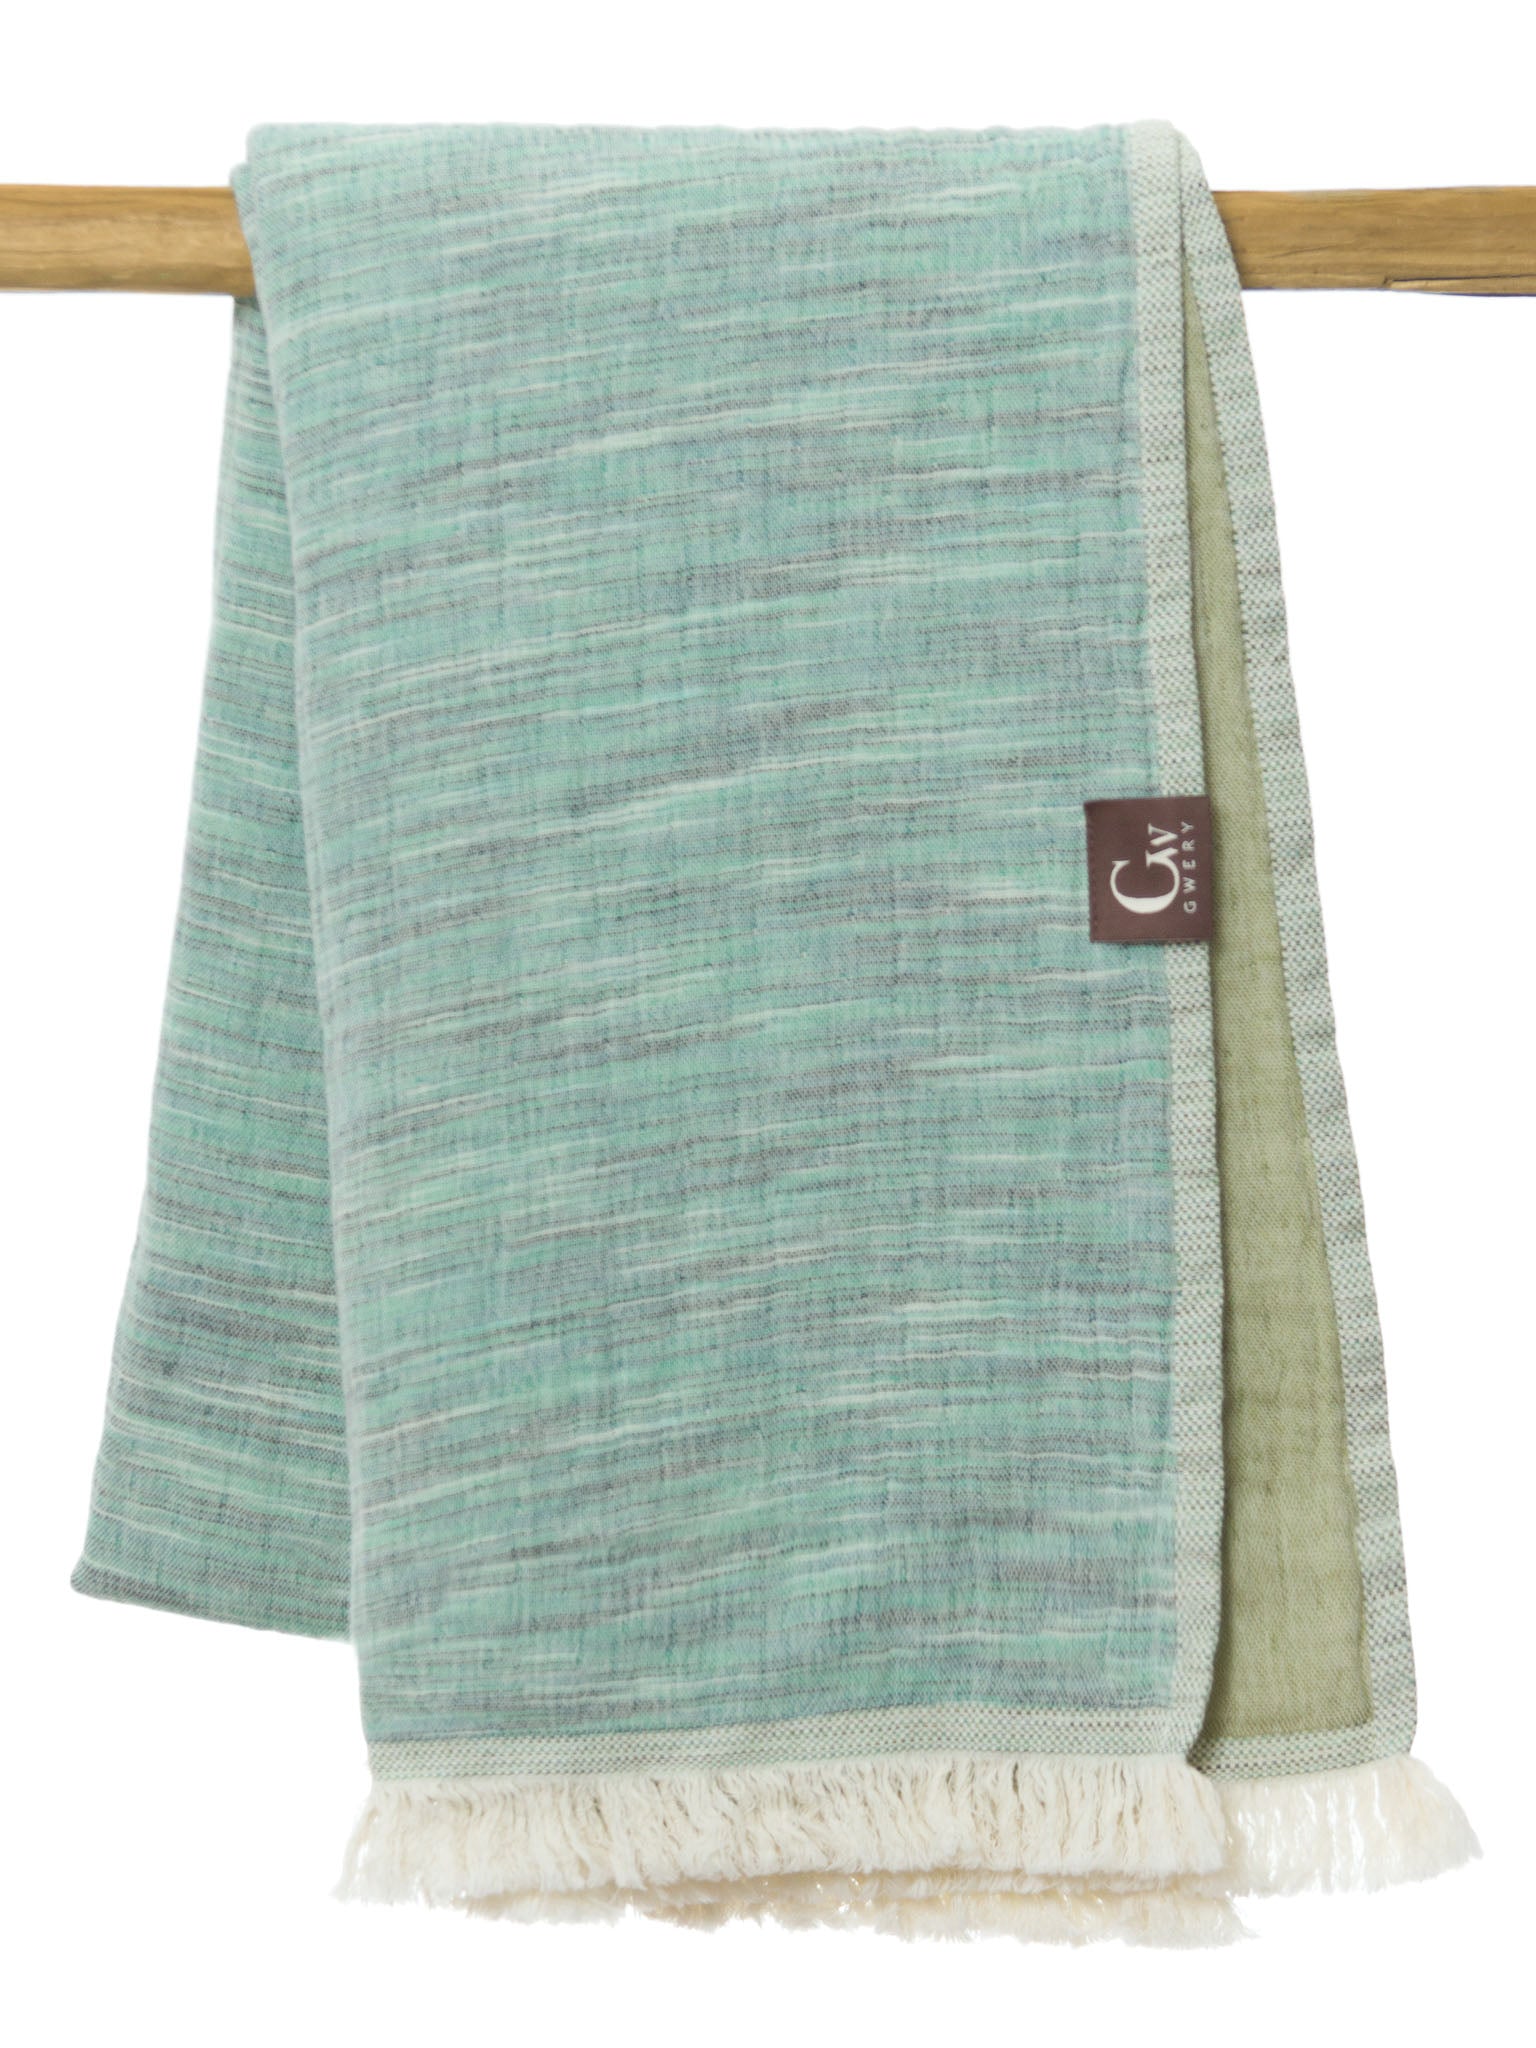 Green patterned, double sided, beach towel folded